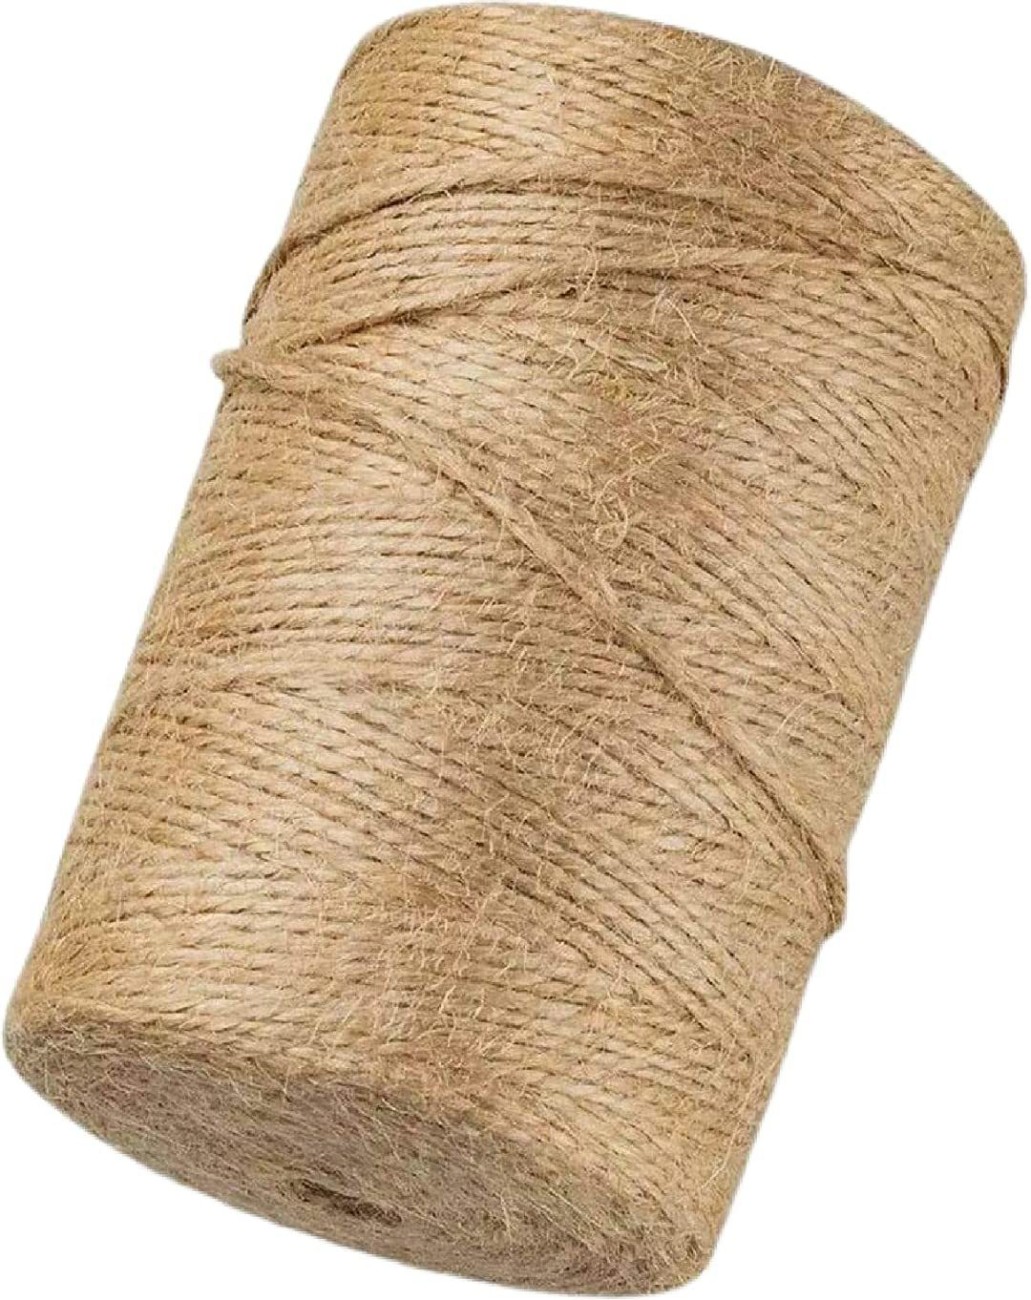 1 to 250m Natural Brown Jute Thread Rustic Hessian Twine String